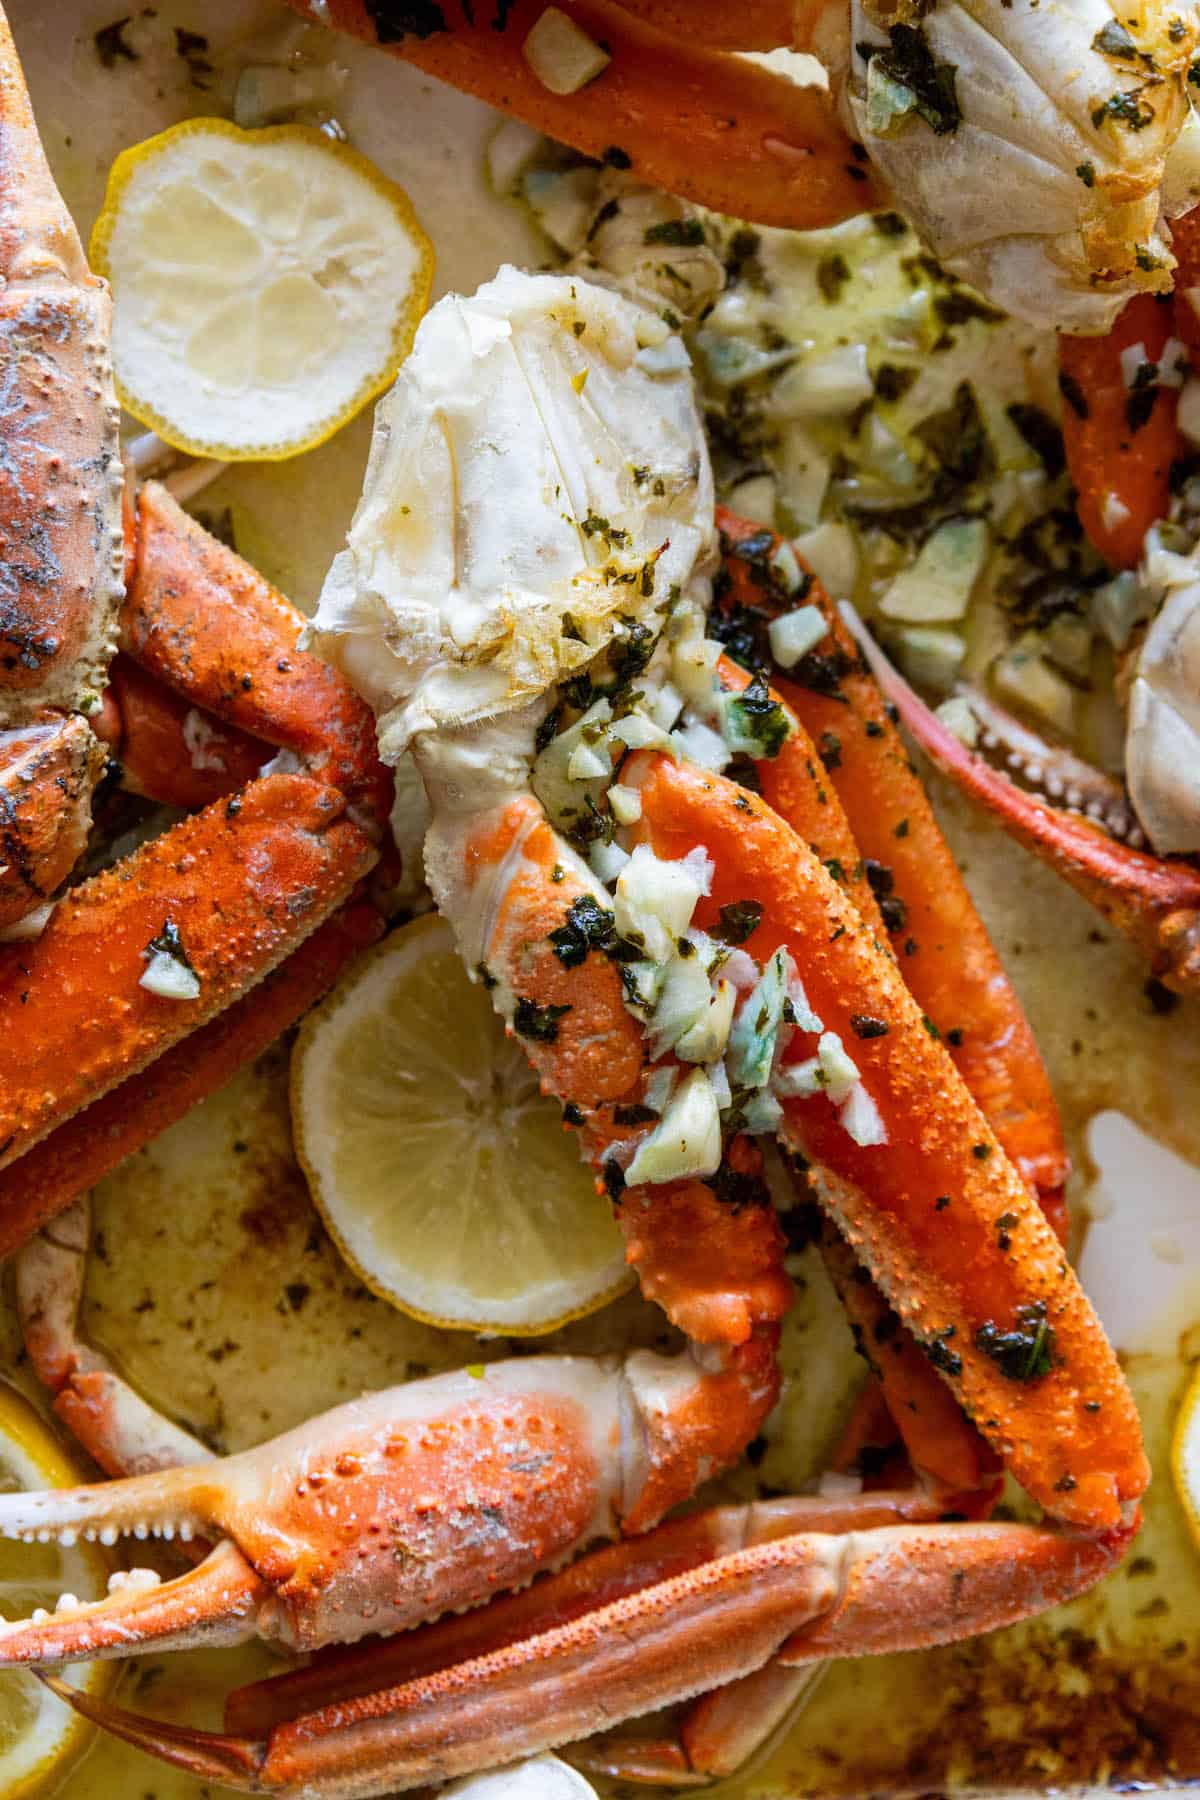 Baked snow crab legs with lemon and herbs on a baking sheet.